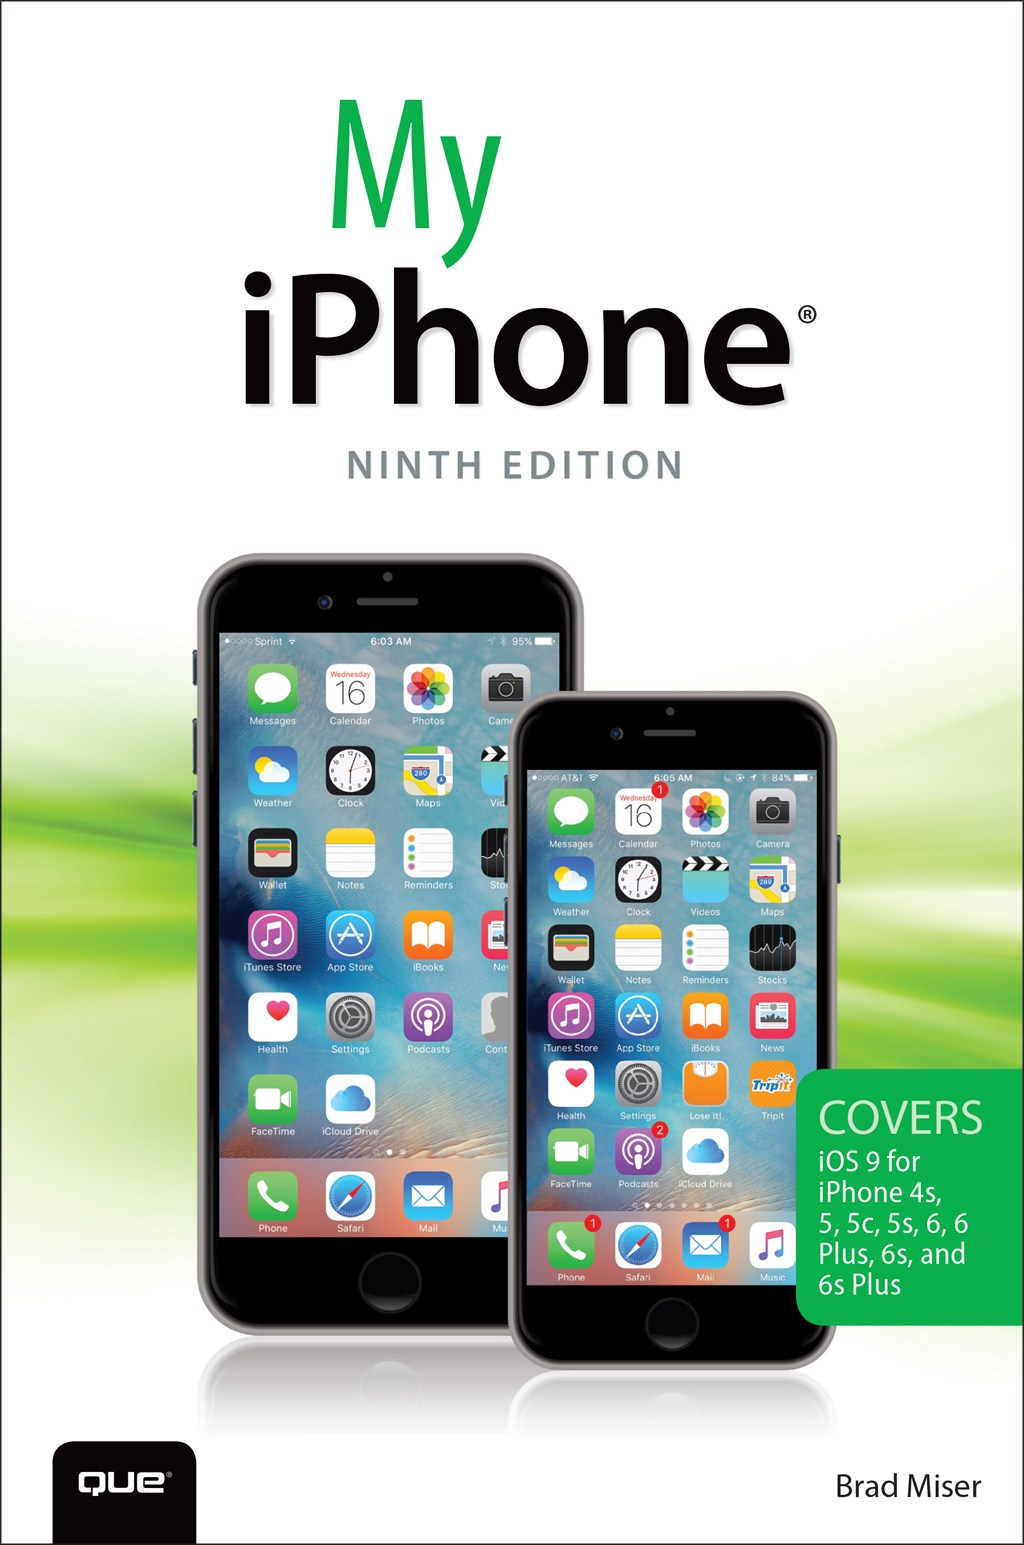 My iPhone (Covers iOS 9 for iPhone 6s/6s Plus, 6/6 Plus, 5s/5C/5, and 4s), 9th Edition